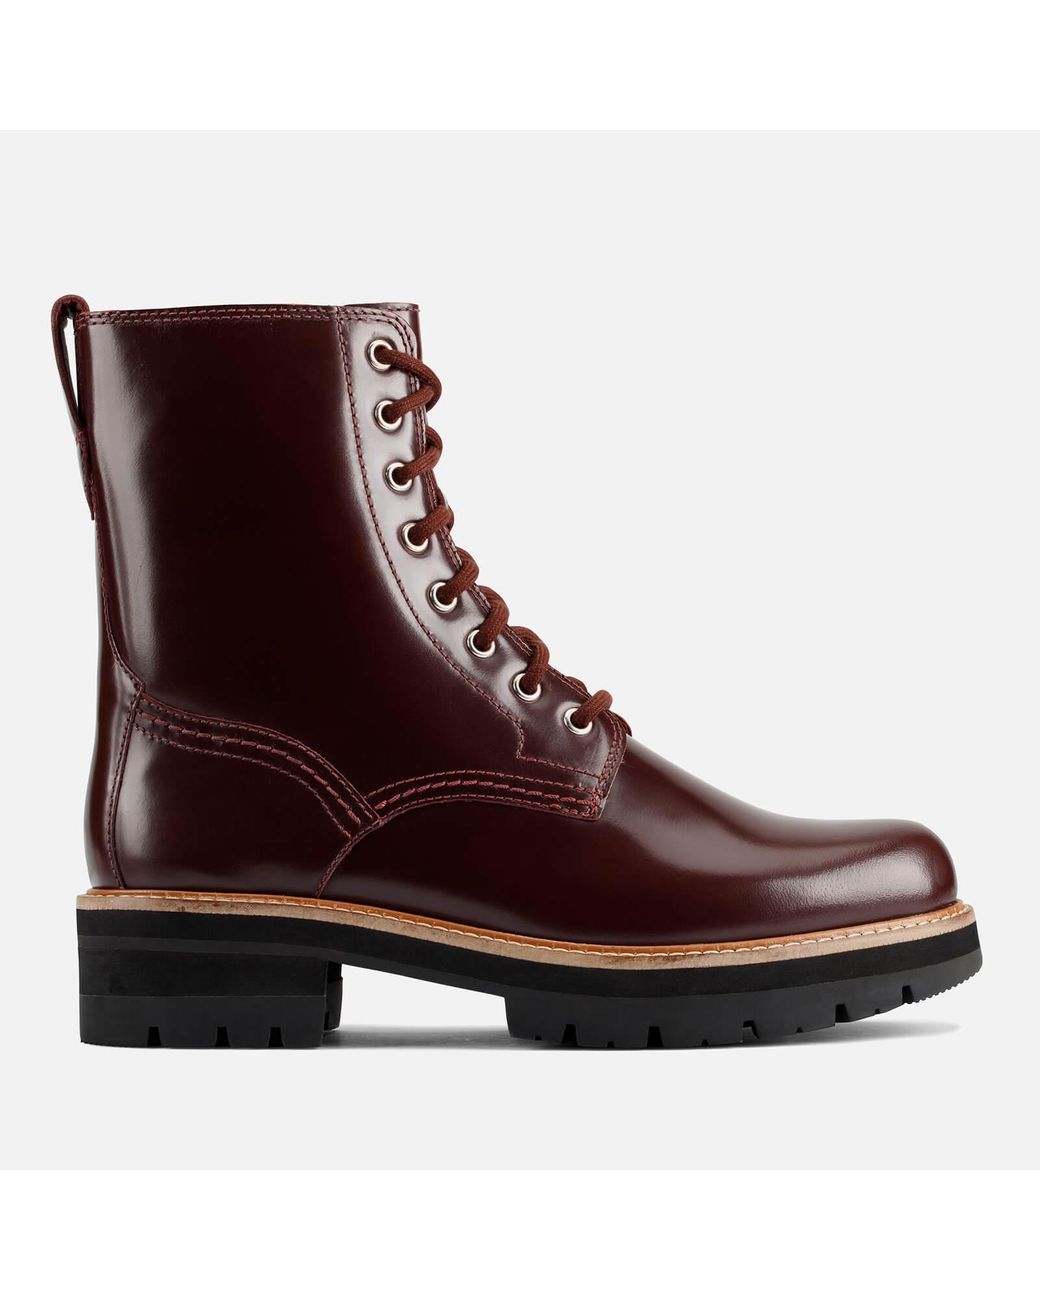 Clarks Orianna Hi Leather Lace Up Boots in Brown | Lyst